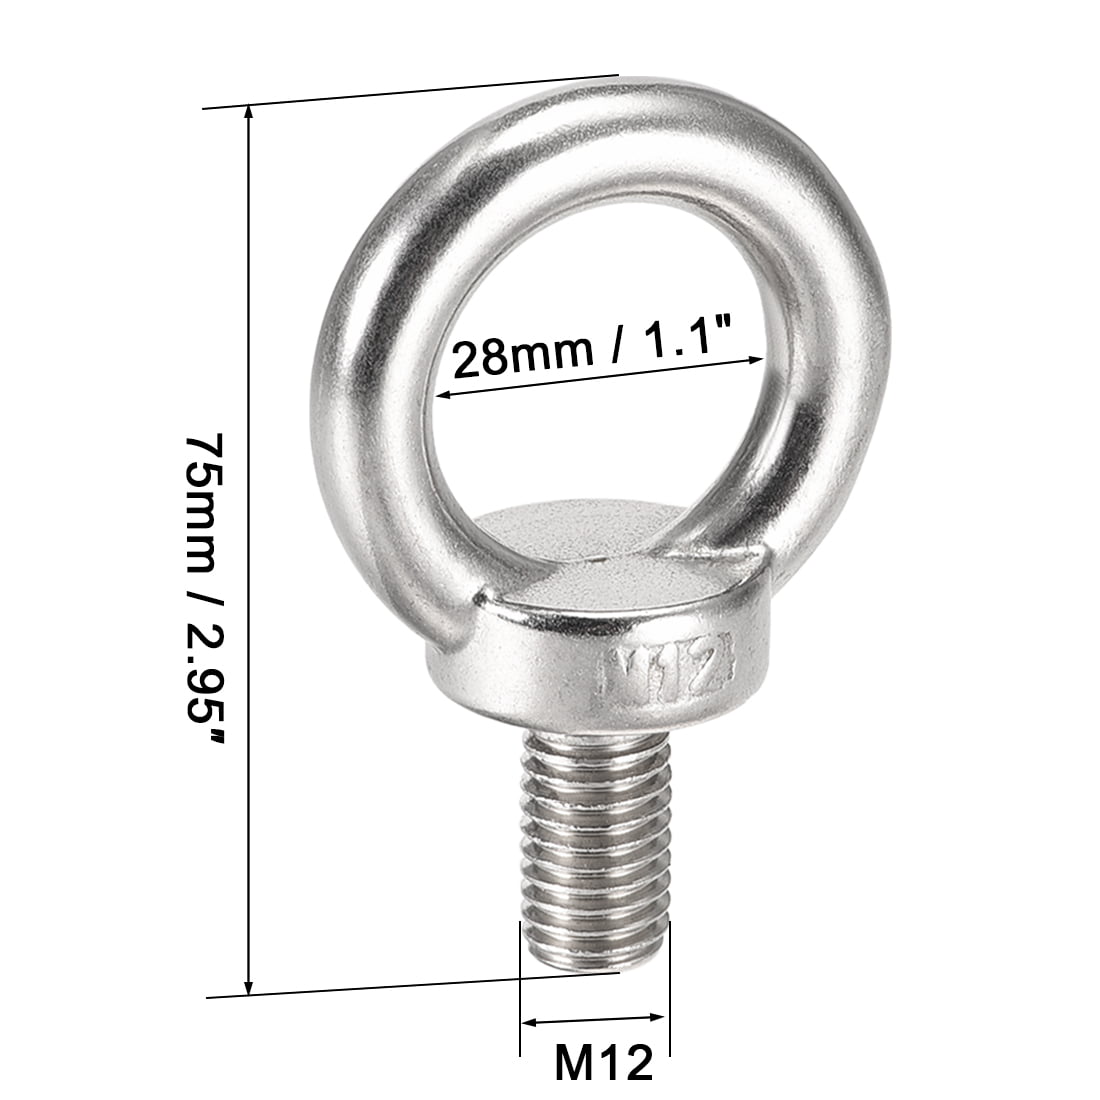 Locking Pin and Allen Key 304 Stainless Steel Lifting Eye Bolt Ring M12 W/ Nut 